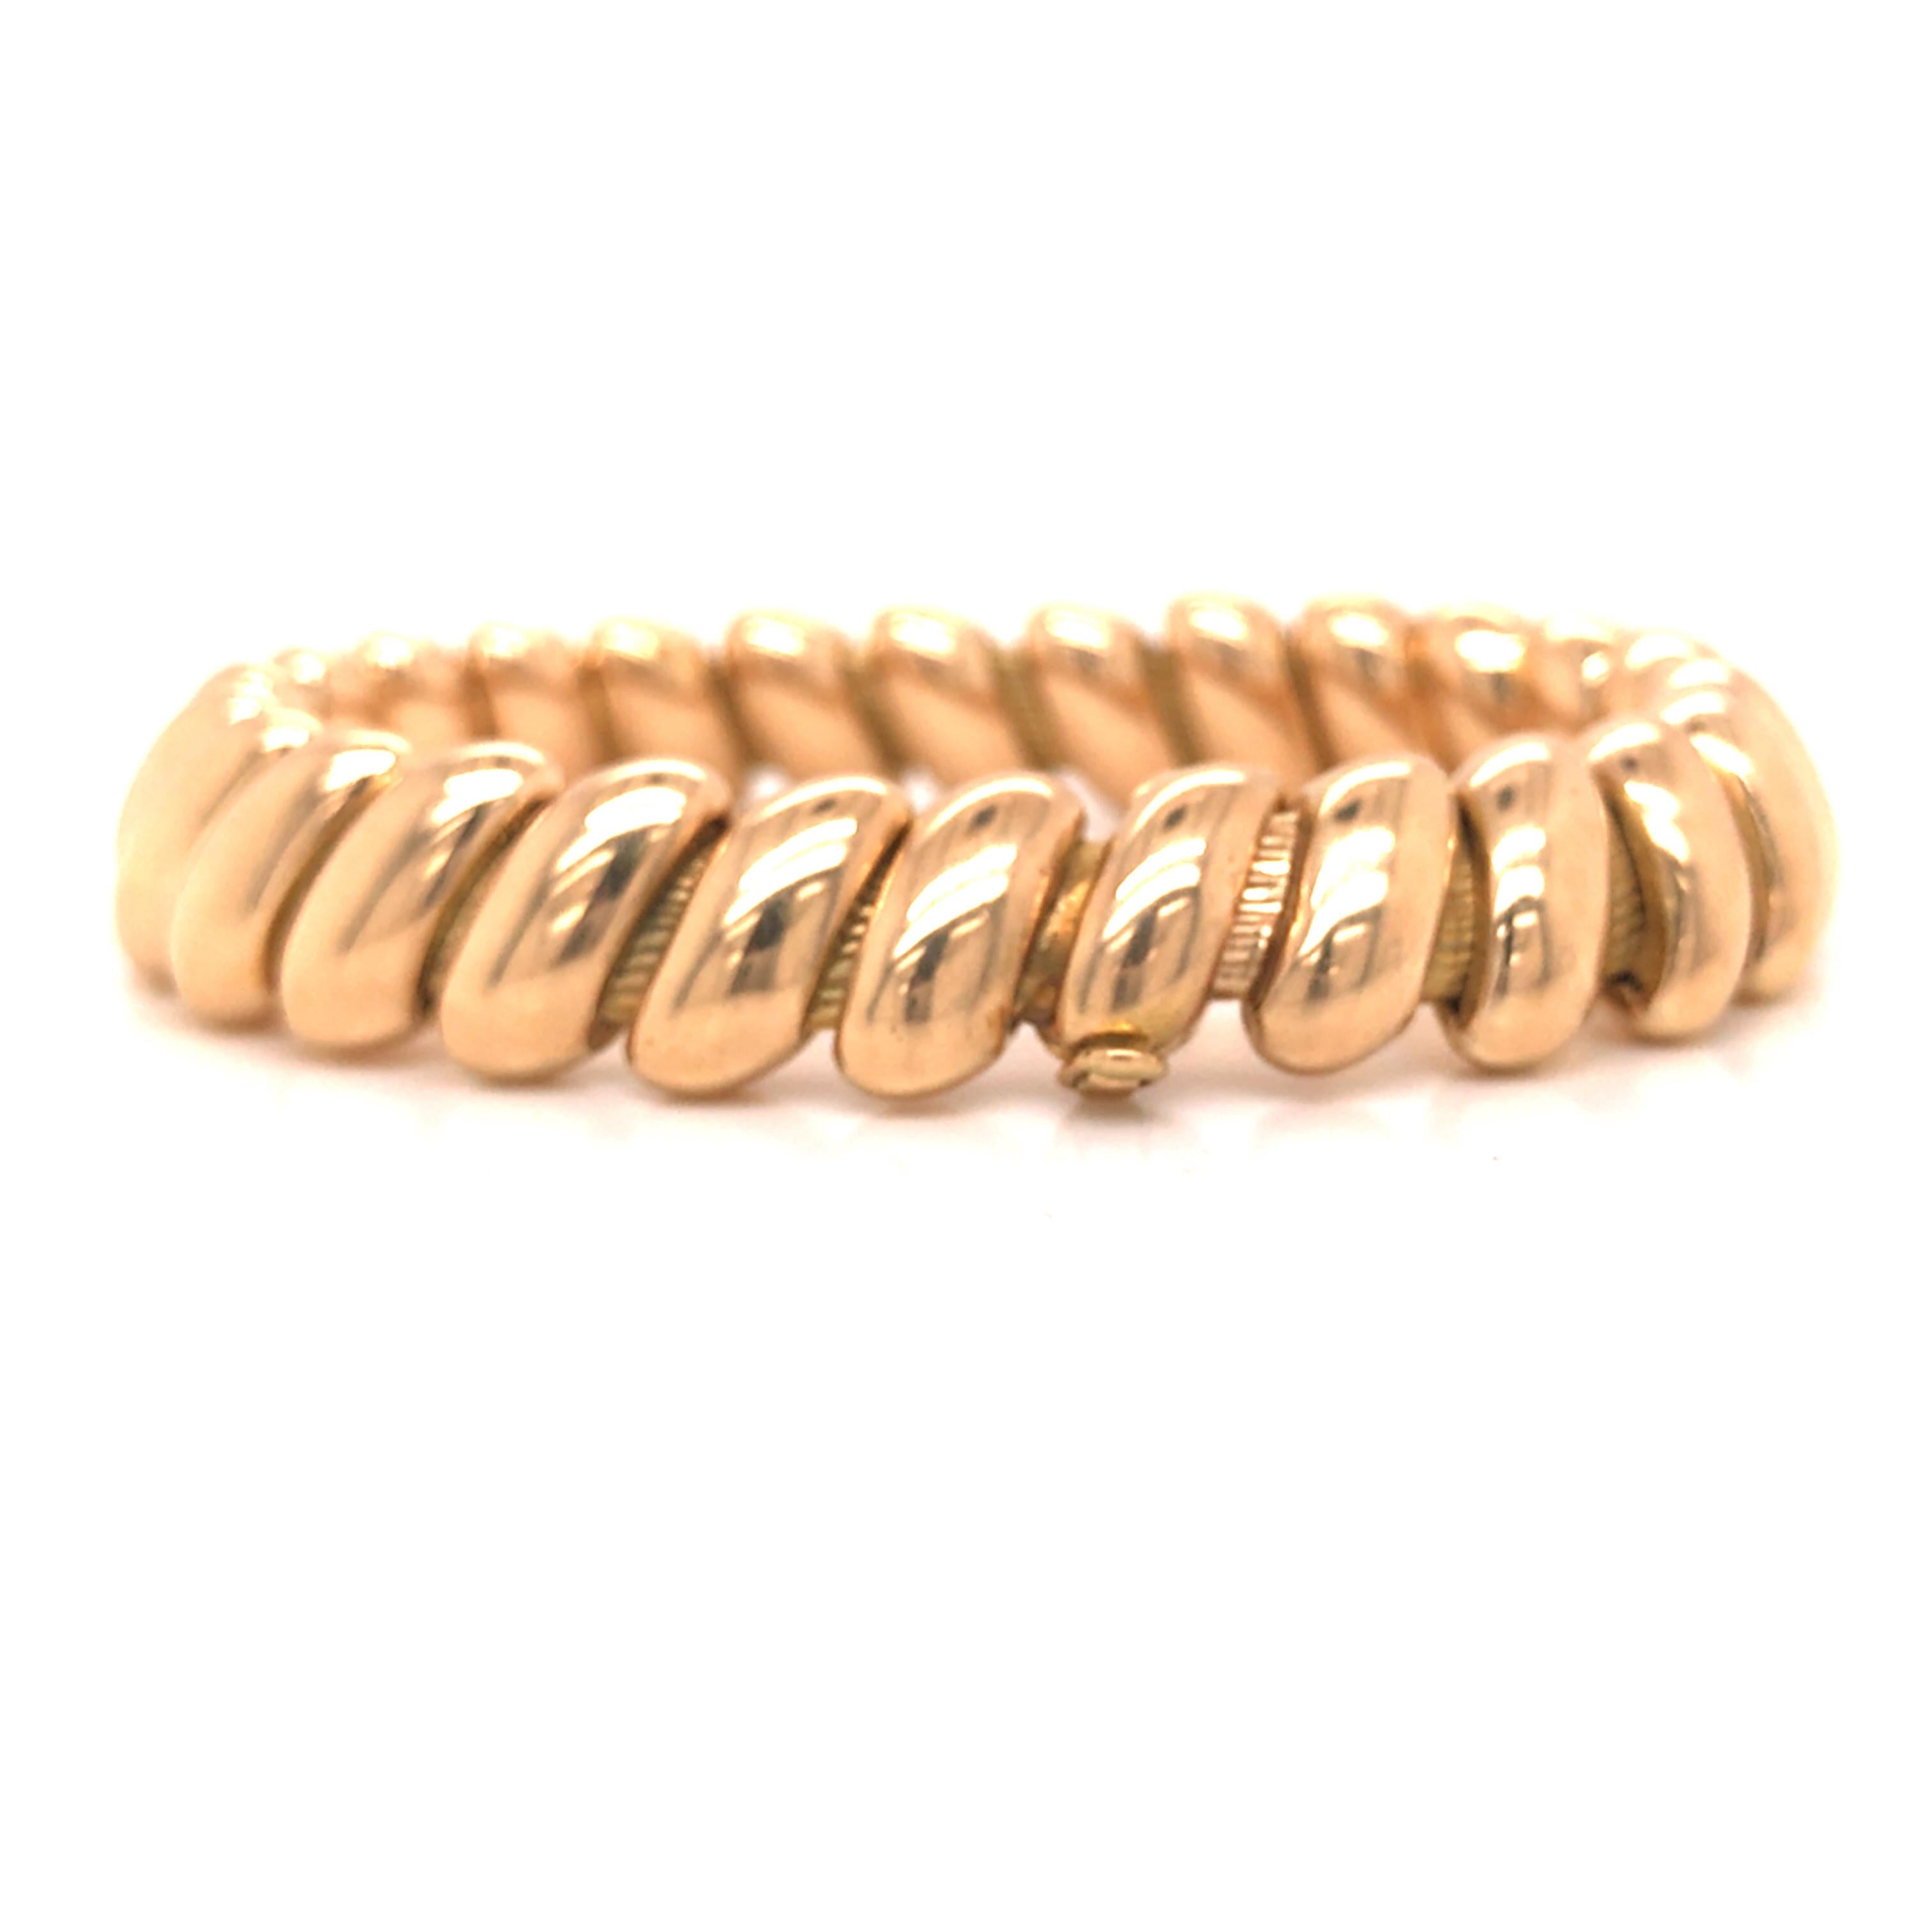 Tiffany & Co. 18K Yellow Gold Bracelet.  The Bracelet measures 7 1/4 inch in length and 1/2 inch in width.  Stamped 